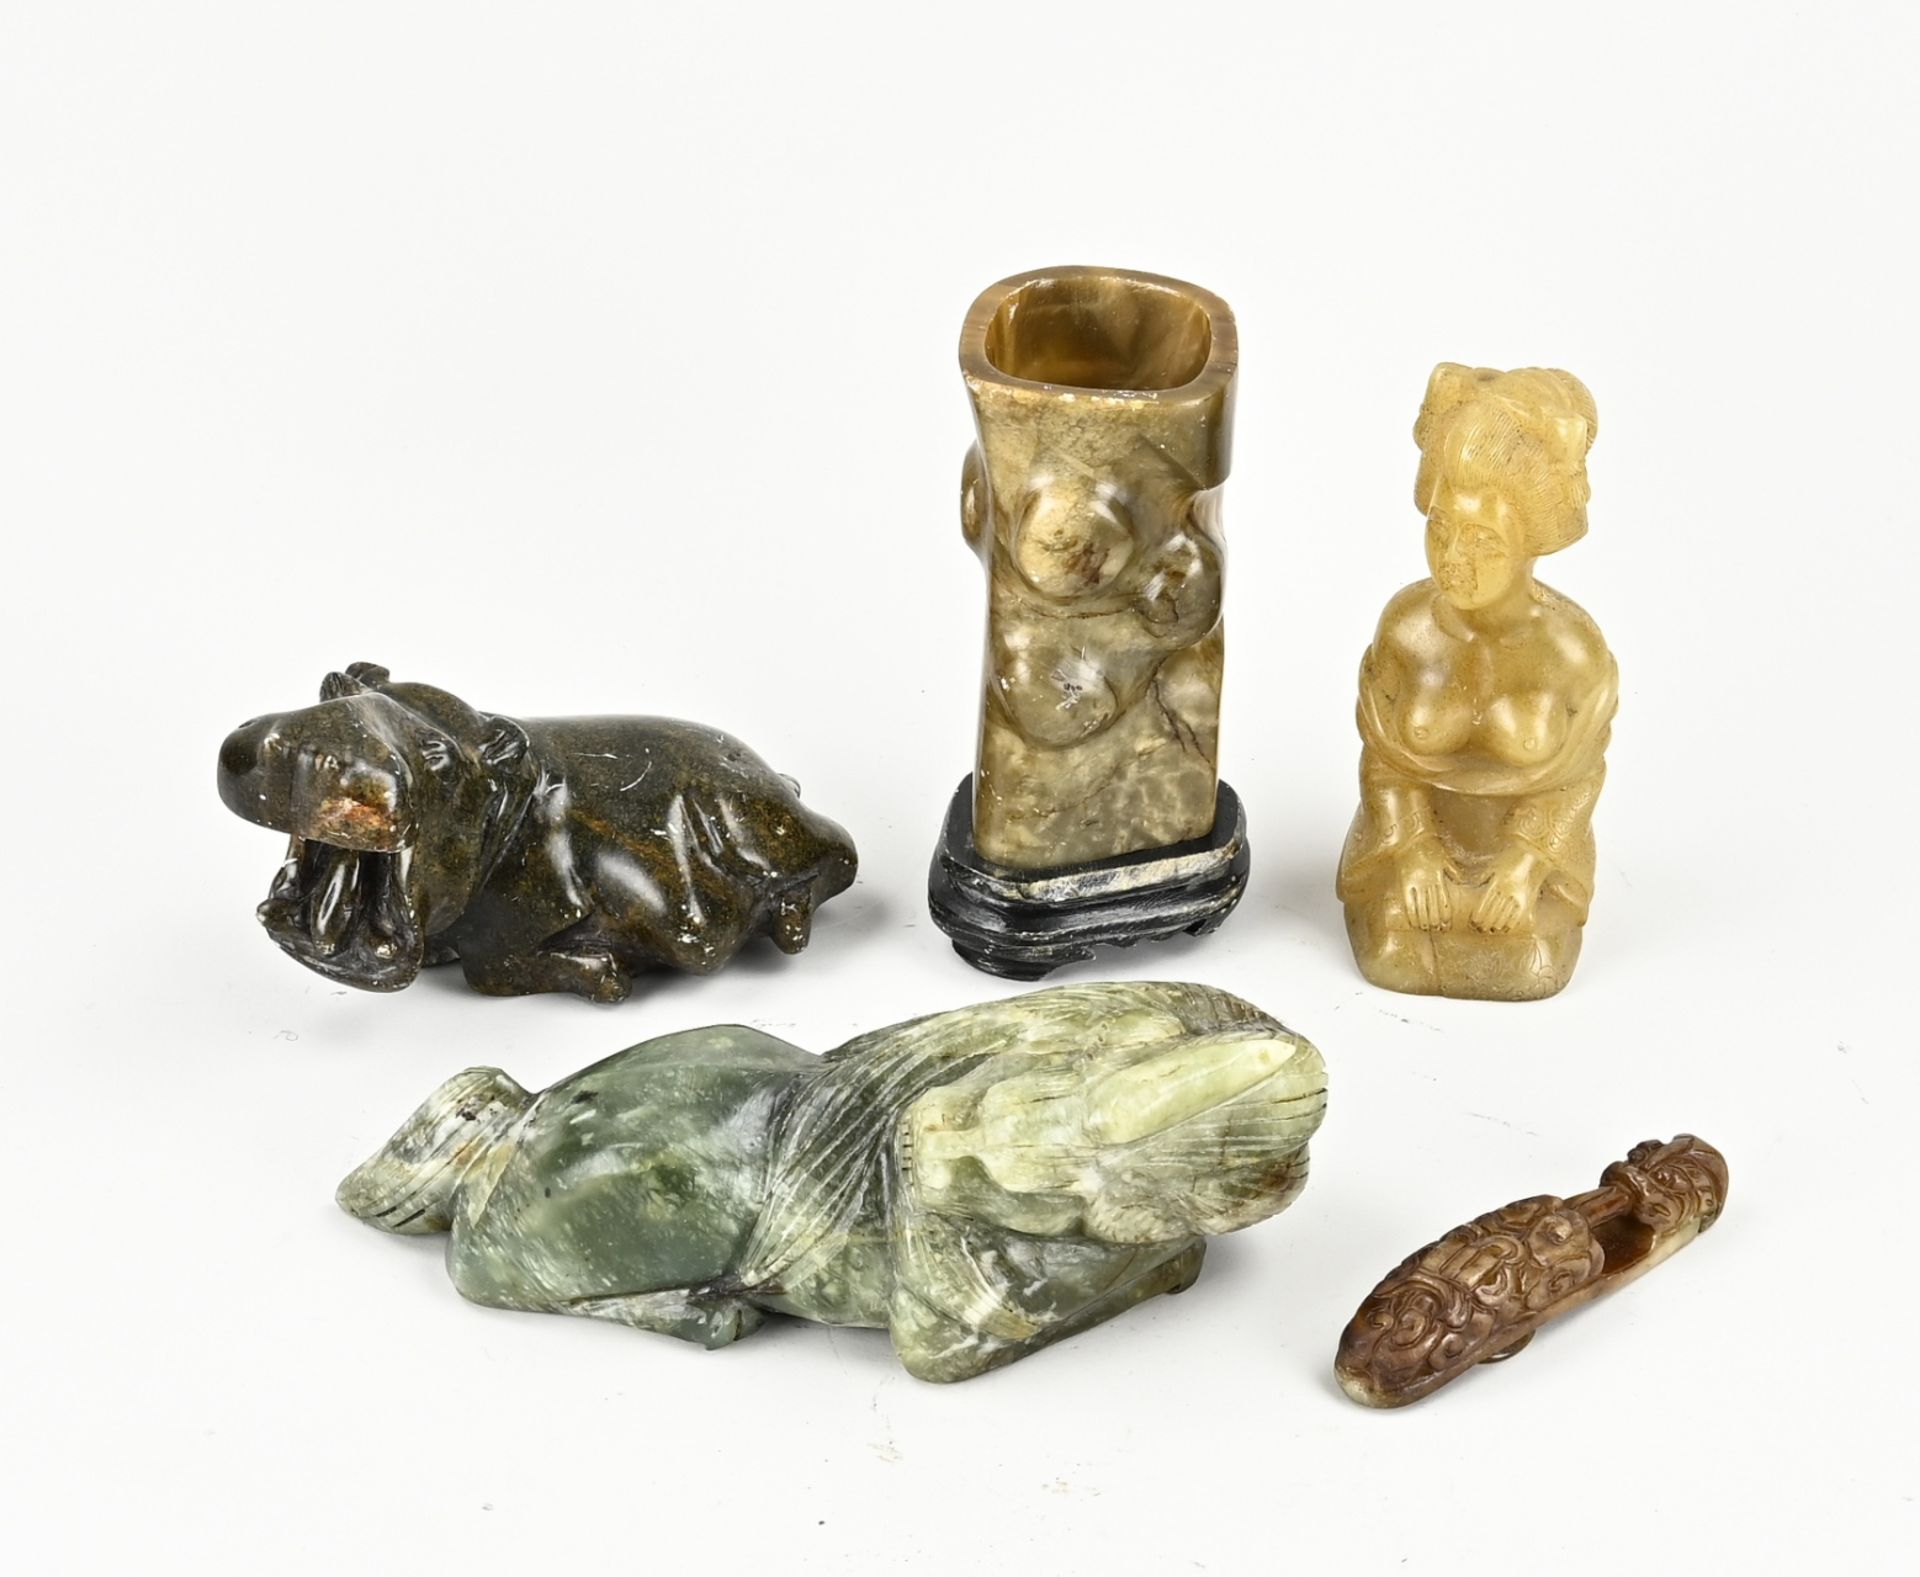 5x Oriental/Chinese figures (natural stone/jade?)